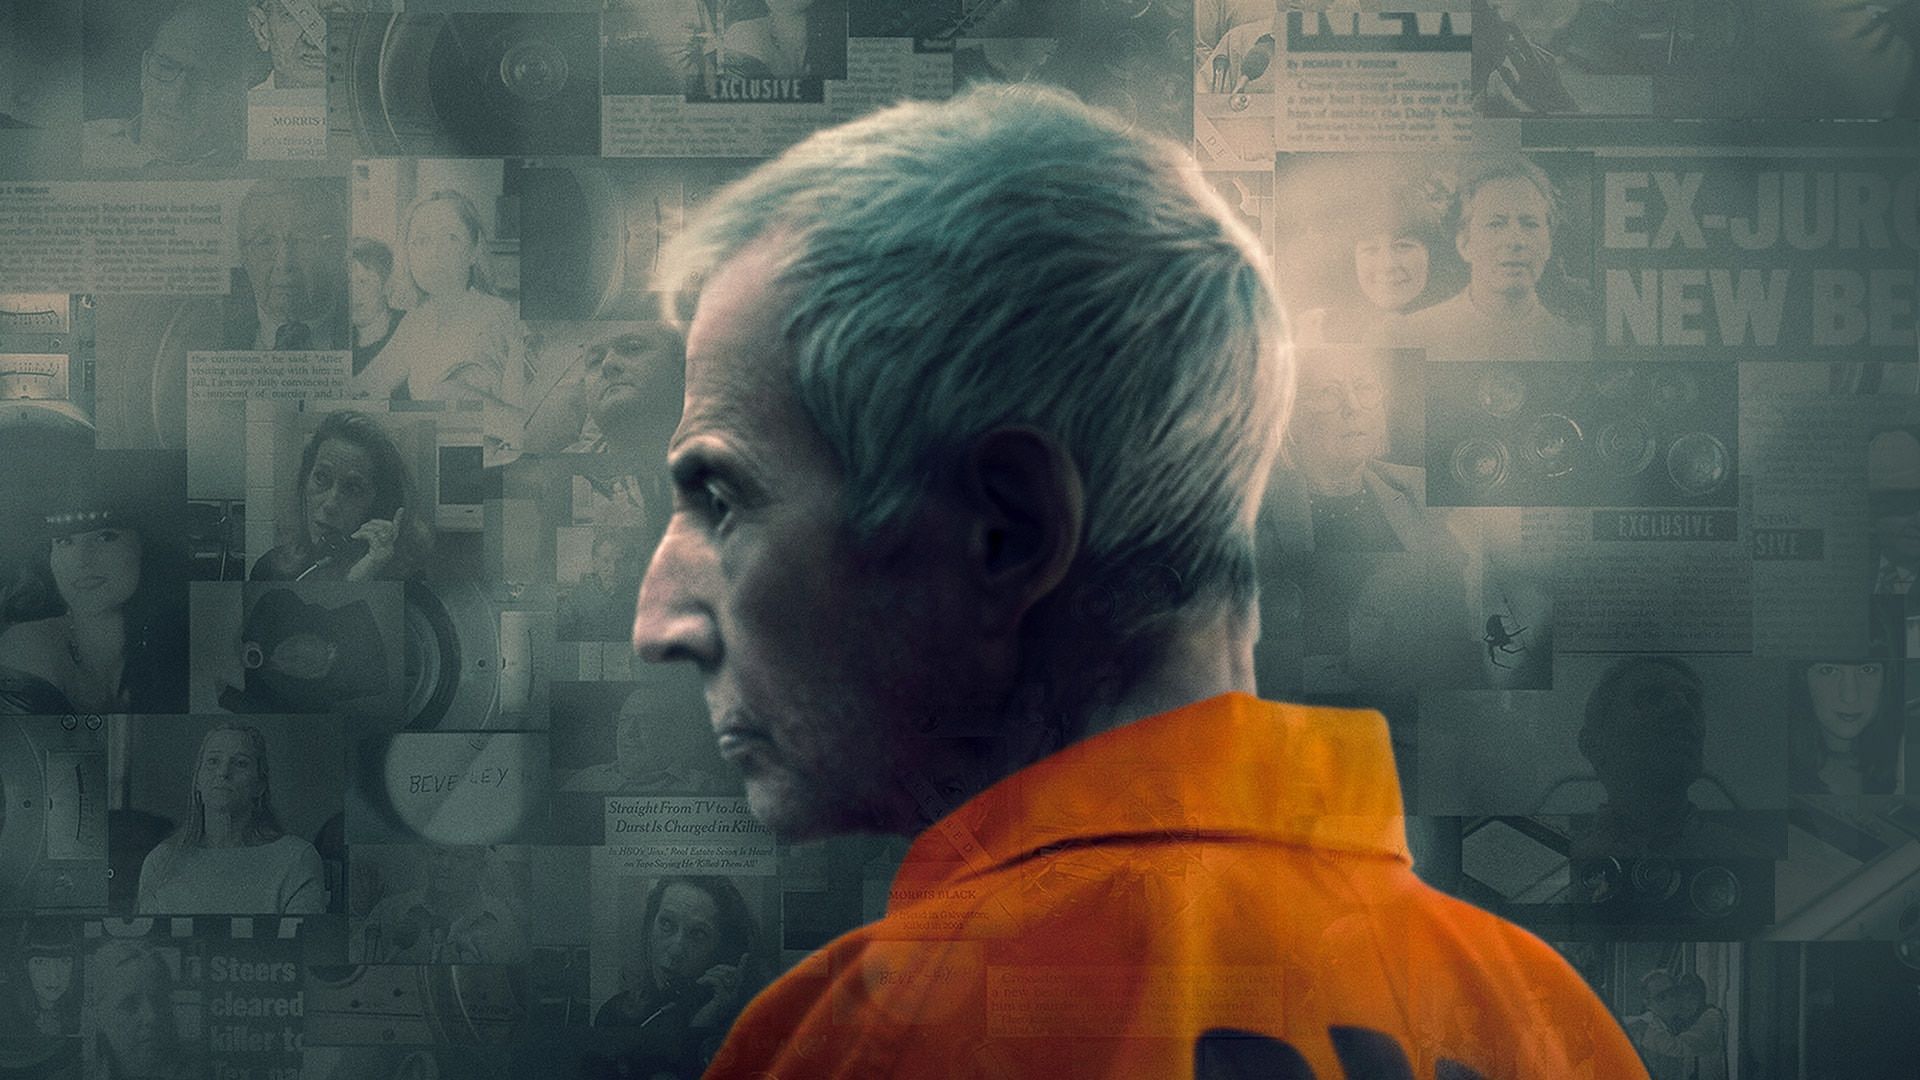 The Jinx follows Robert Durst and the criminal allegations against him. (Image via HBO)